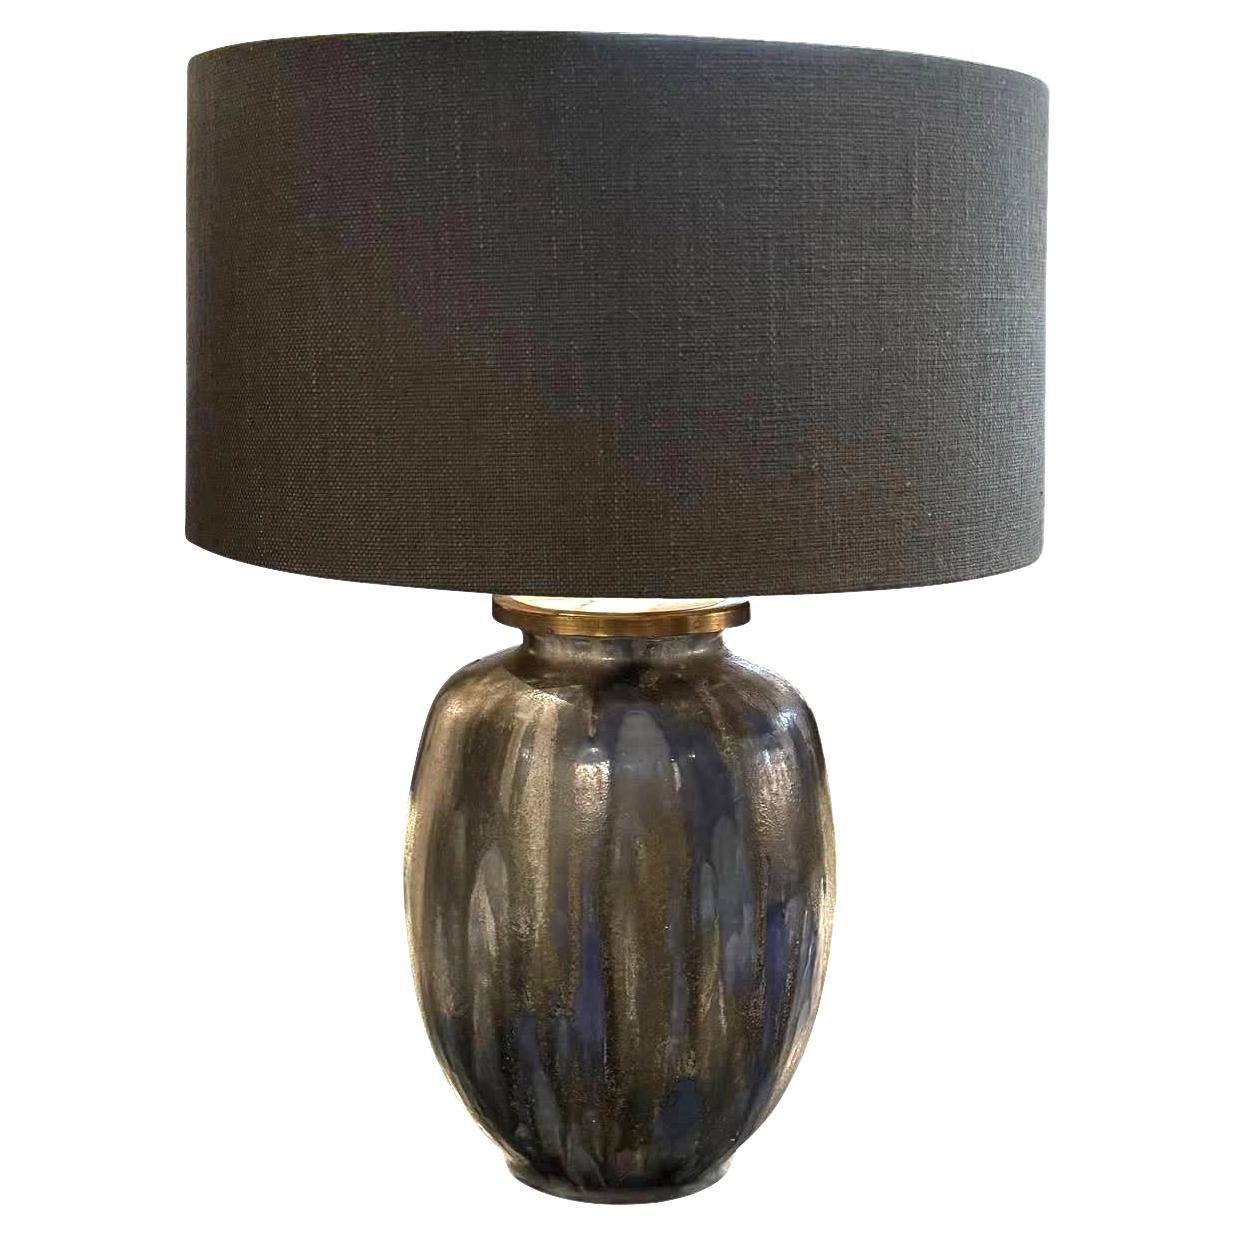 Charcoal Greys And Cobalt Blue Single Lamp With Shade, Belgium, Mid Century For Sale